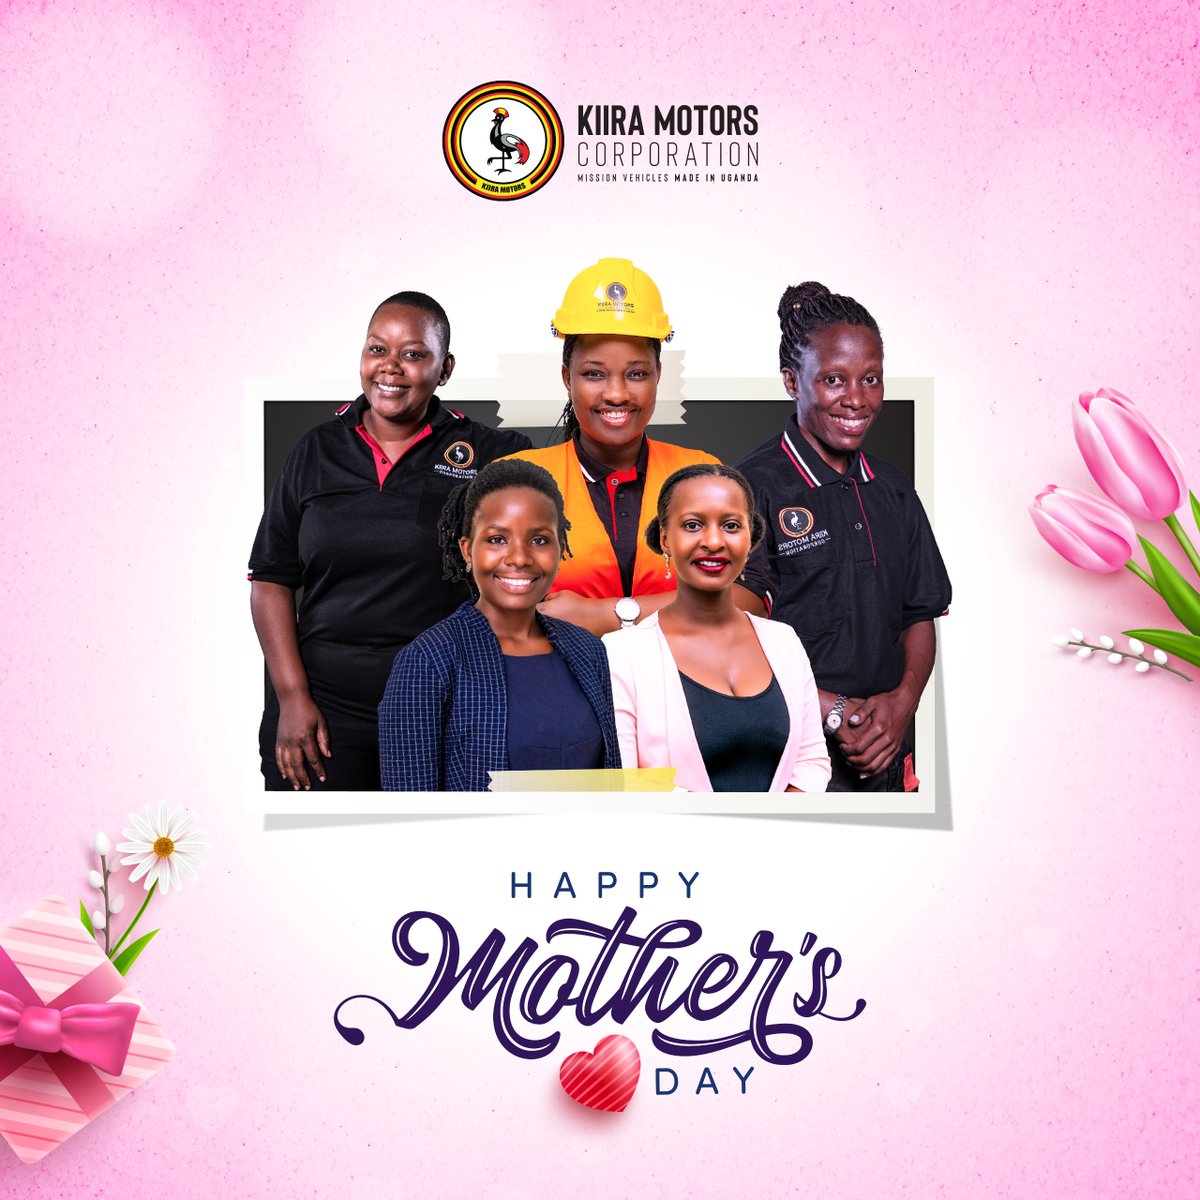 💪Your strength inspires. 🤝Balance is key. 🤞Embrace imperfection. 👍You're doing amazing, juggling it all. 🩷Take pride in every small victory! We are Celebrating Mothers Making Africa's Mobility Solutions. Happy #MothersDay 🩷